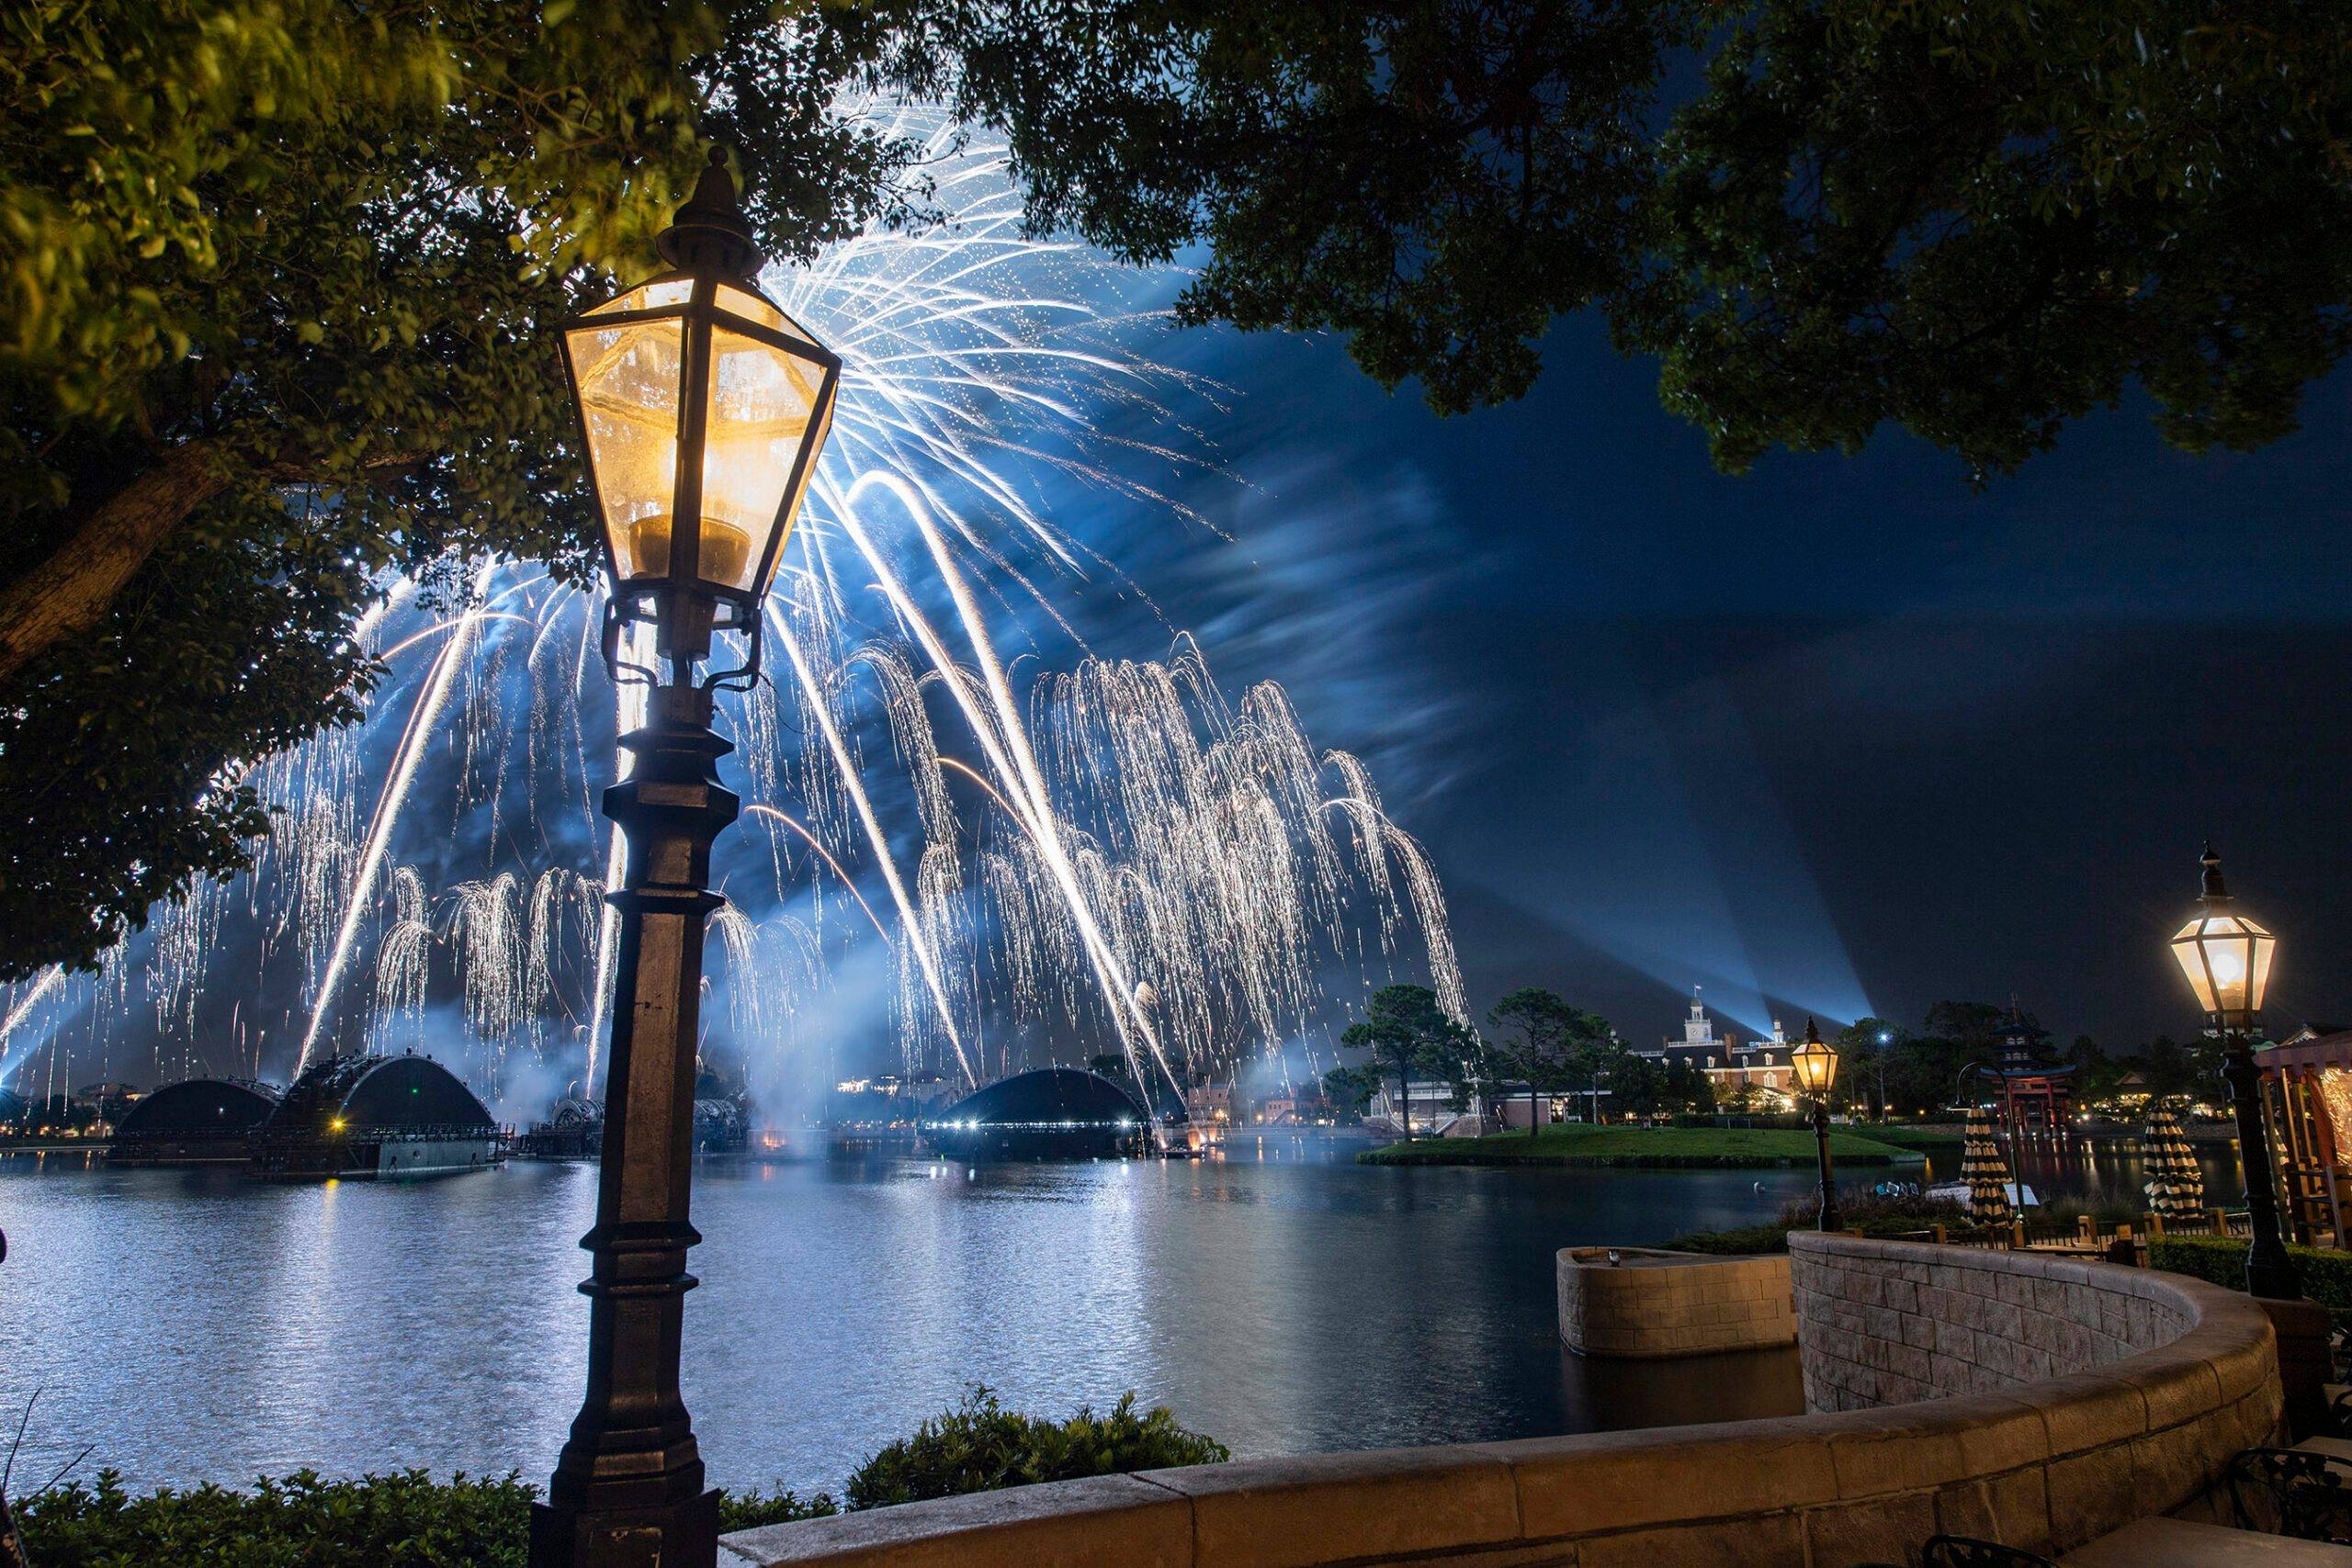 Updated version of EPCOT Forever now showing at Walt Disney World